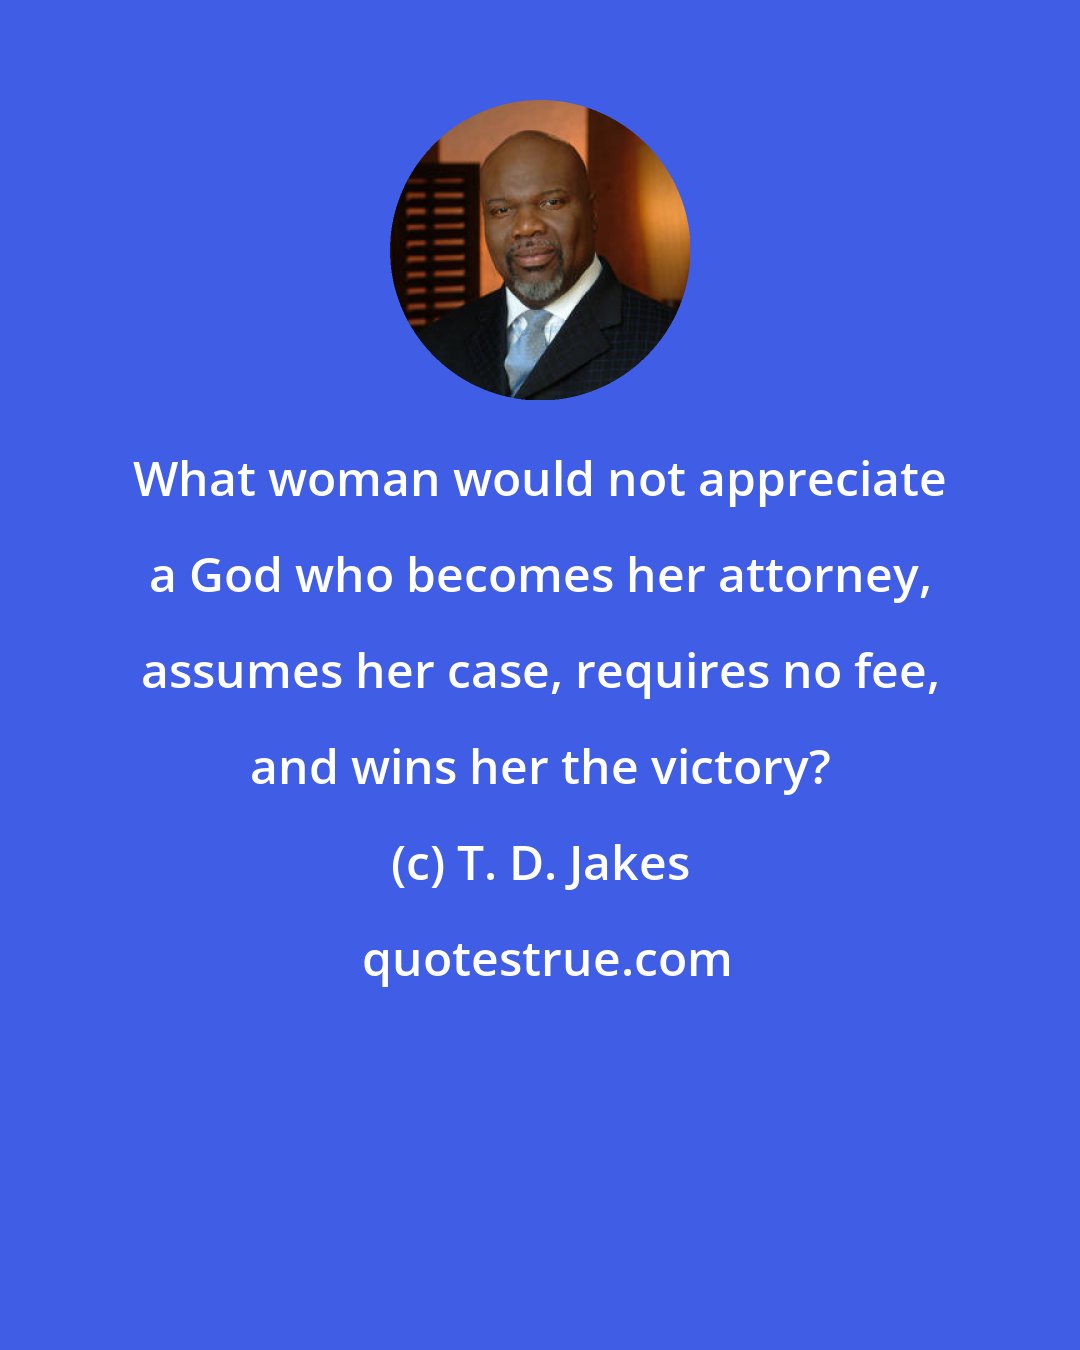 T. D. Jakes: What woman would not appreciate a God who becomes her attorney, assumes her case, requires no fee, and wins her the victory?